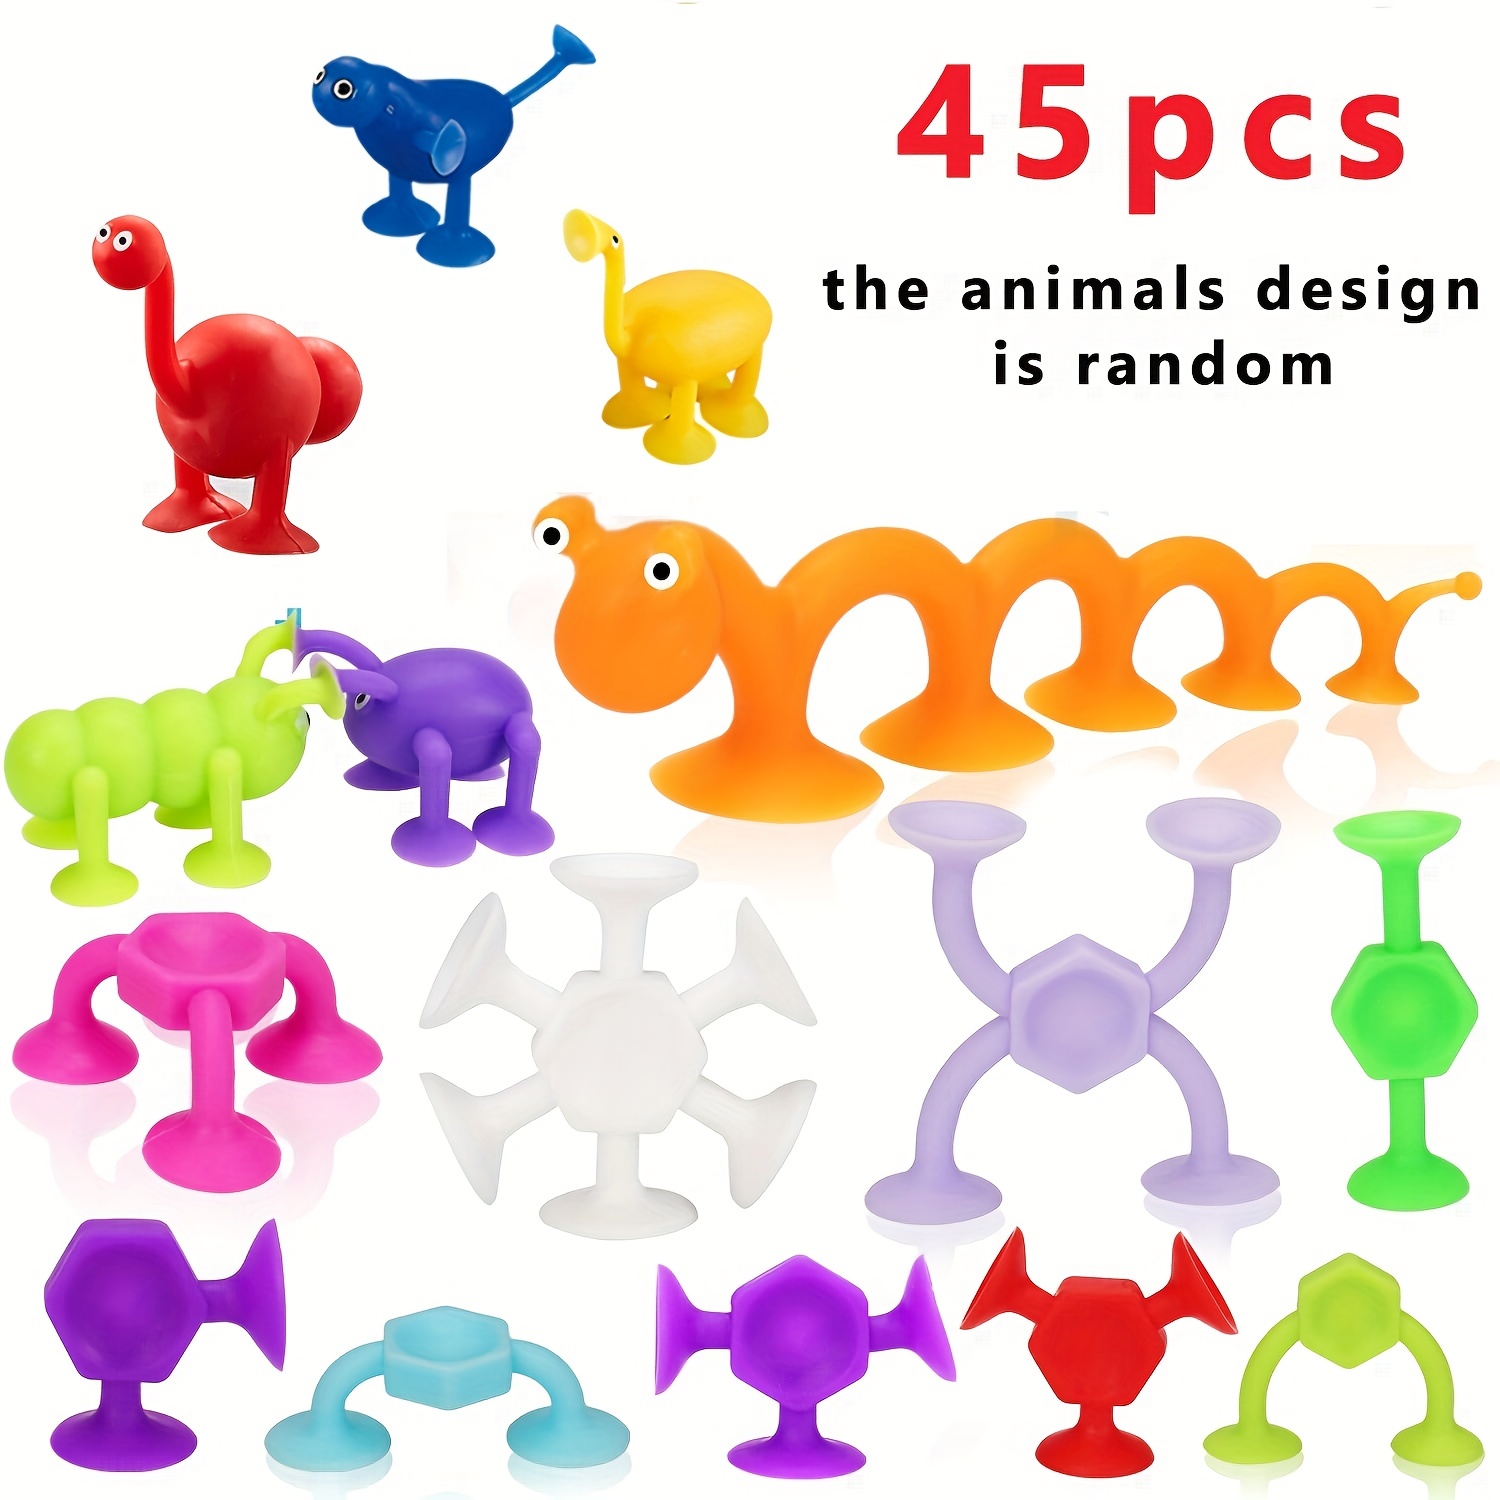  50 Pieces Suction Bath Toys for Kids Age 3+, Baby Silicone  Ocean Animal Sucker Toys with Dinosaur Eggshell, Sensory Travel Window Toys  for Toddlers, Stress Release Gifts for Boys Girls Ages